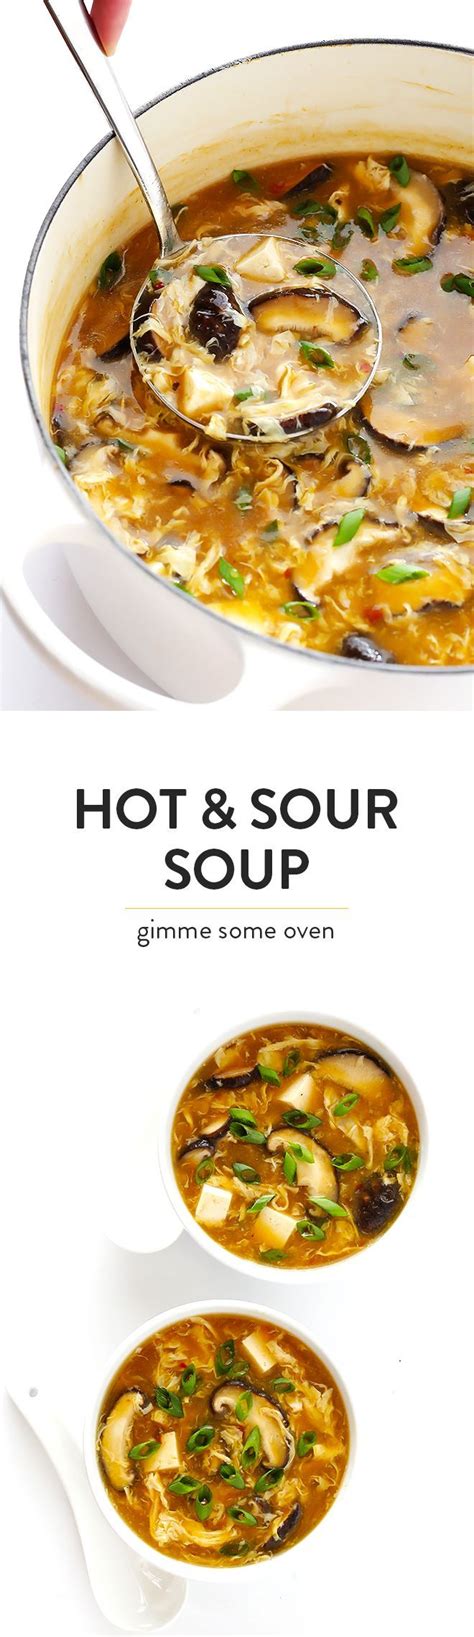 Called thai hot and sour soup, it's bold with spicy heat. +Yummy Call Hot And Sour Soup Recipie - 10 Minute Hot Sour Soup Marion S Kitchen - tornprinze-wall